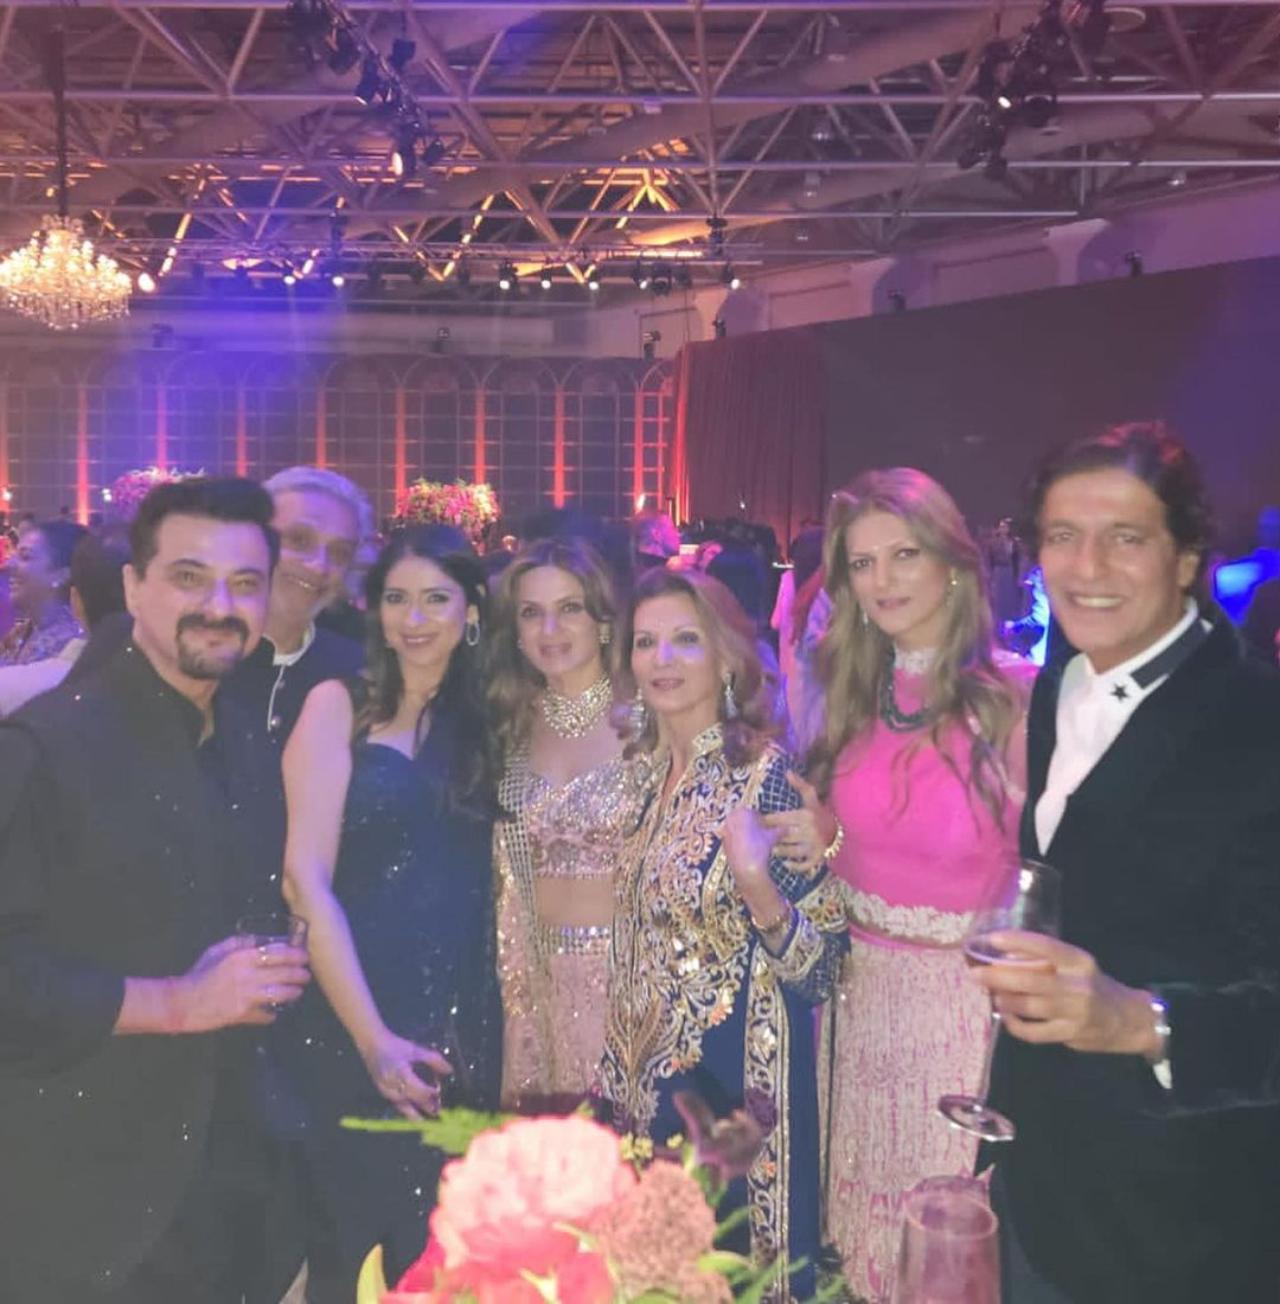 The past week saw a couple of Bollywood celebrities attend a grand wedding in Europe. From Chunky Pandey to Karisma Kapoor to Karan Johar, several celebrities were seen taking to their Instagram stories to share pictures from the wedding